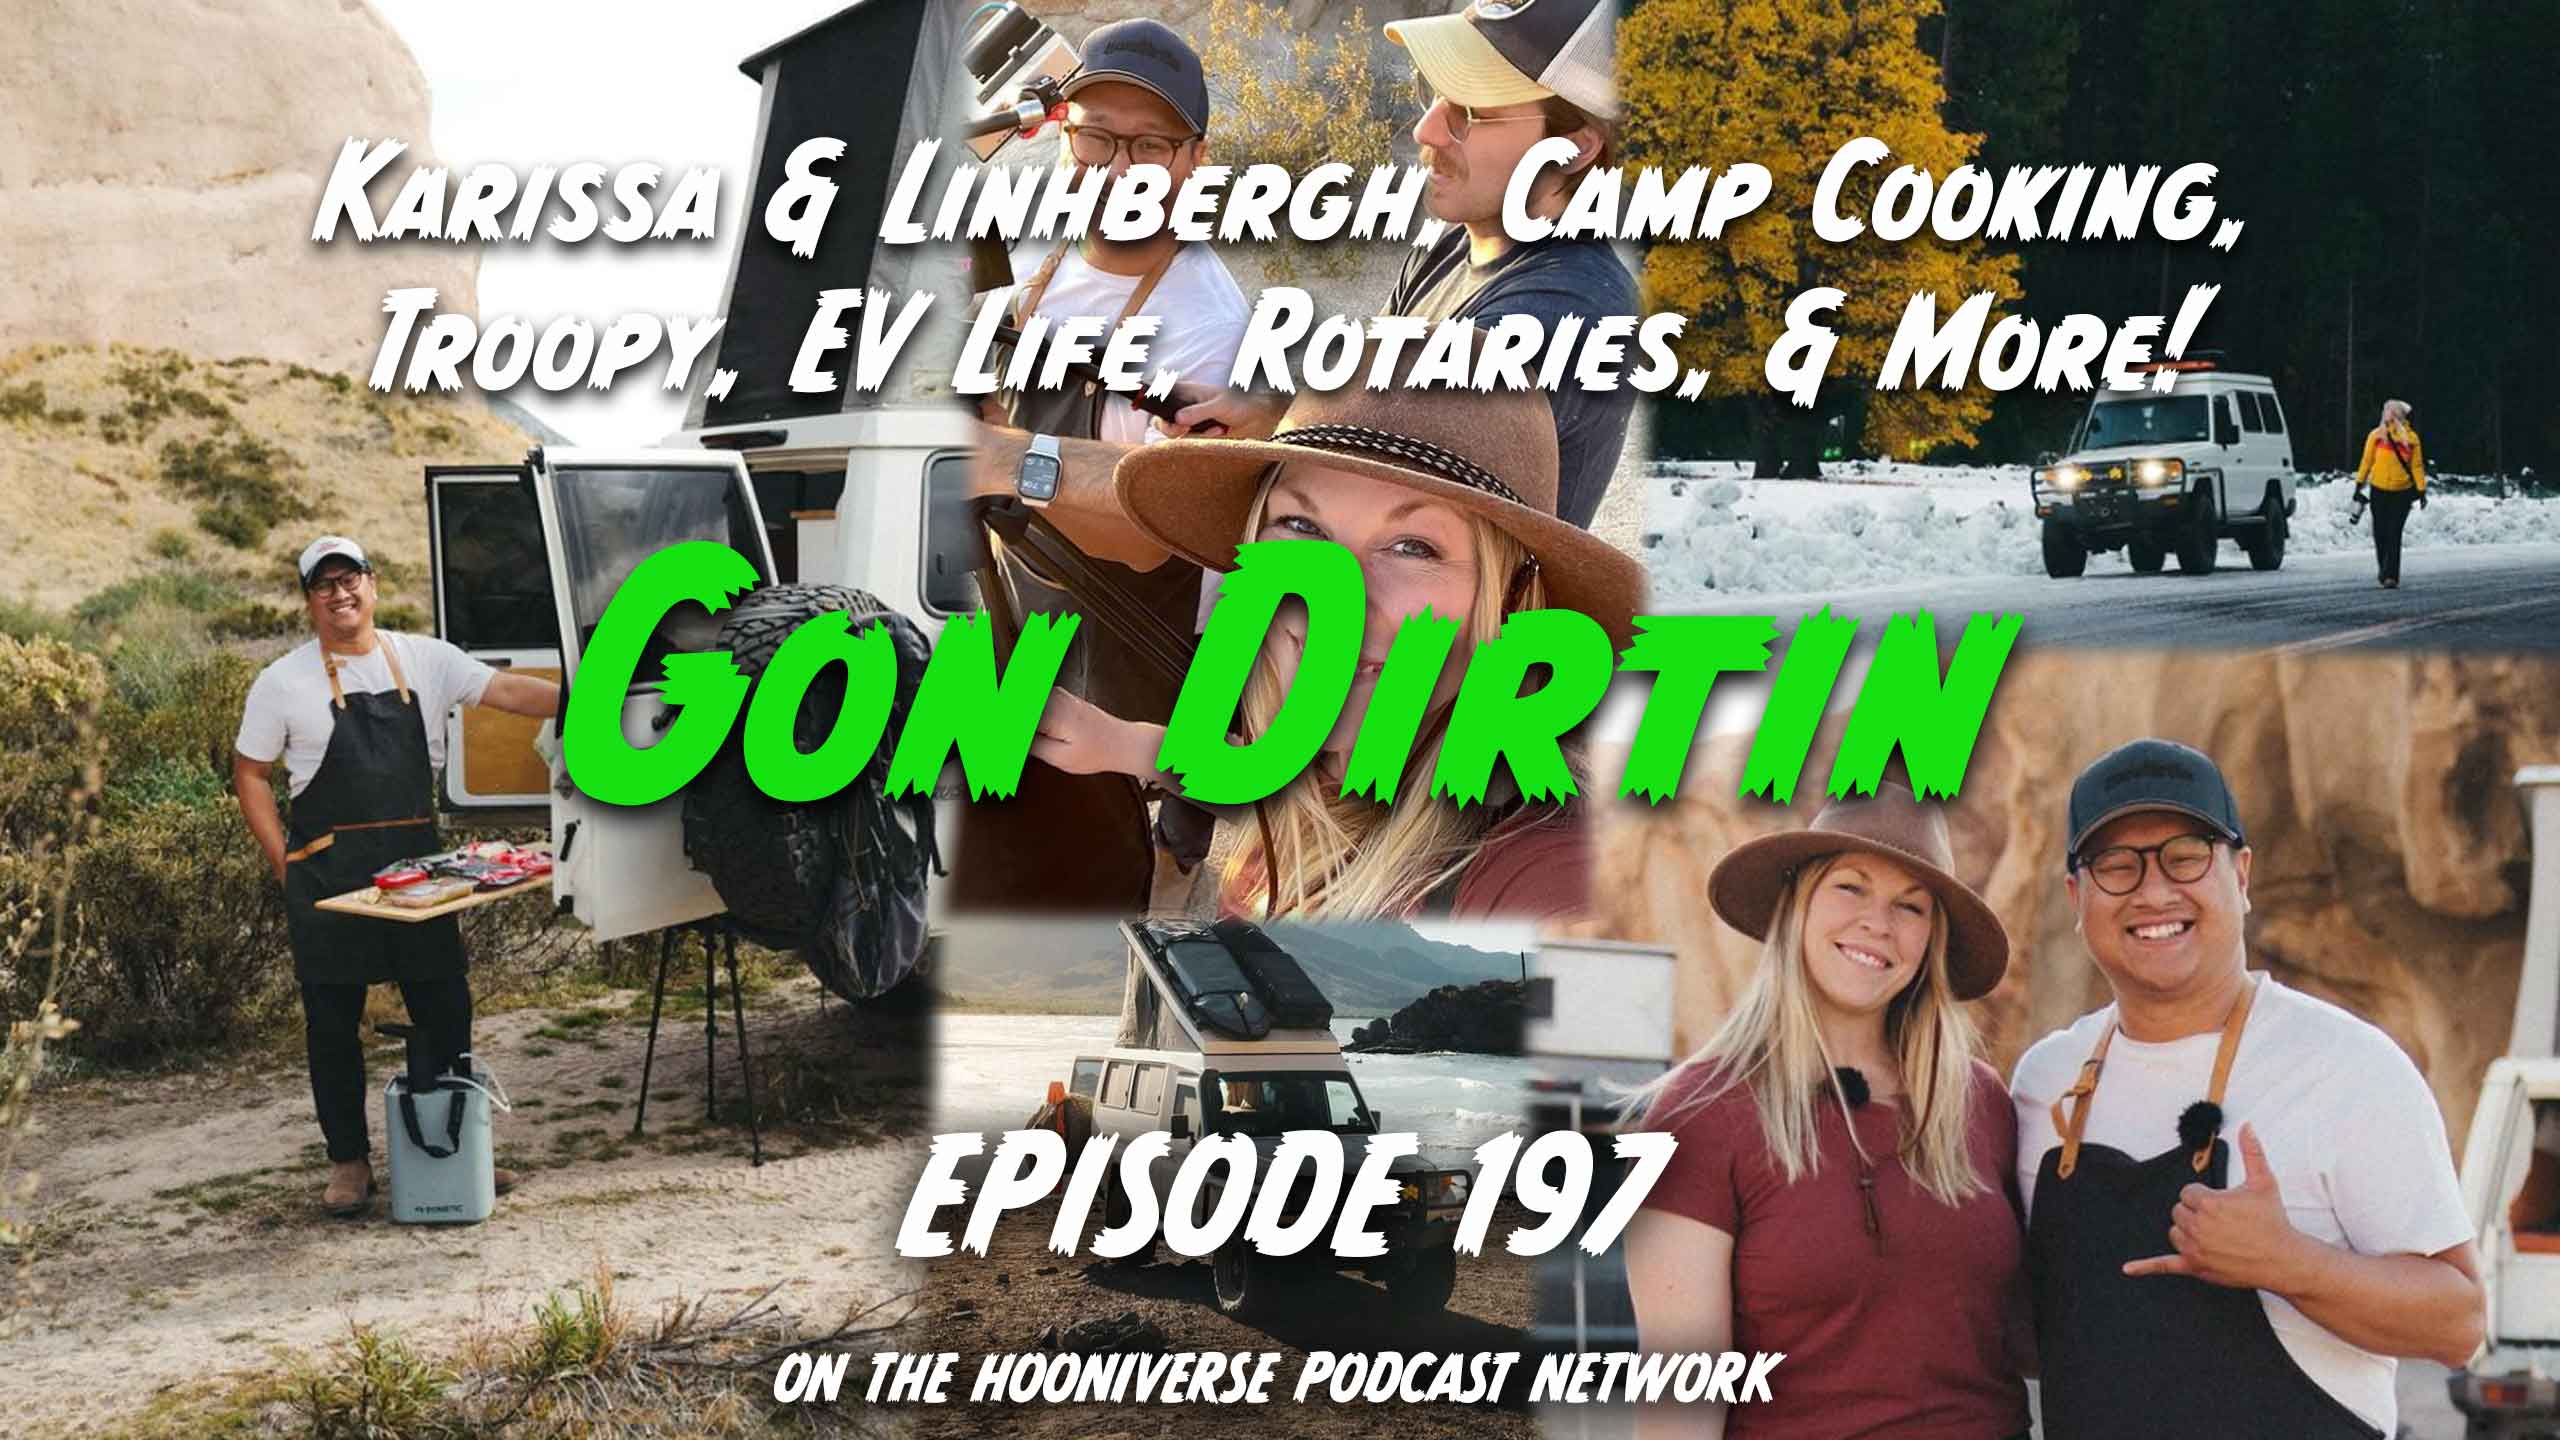 Gon-Dirtin-Karissa-Linhbergh-Gon-Cookin-Troopy-Off-The-Road-Again-Podcast-Episode-197